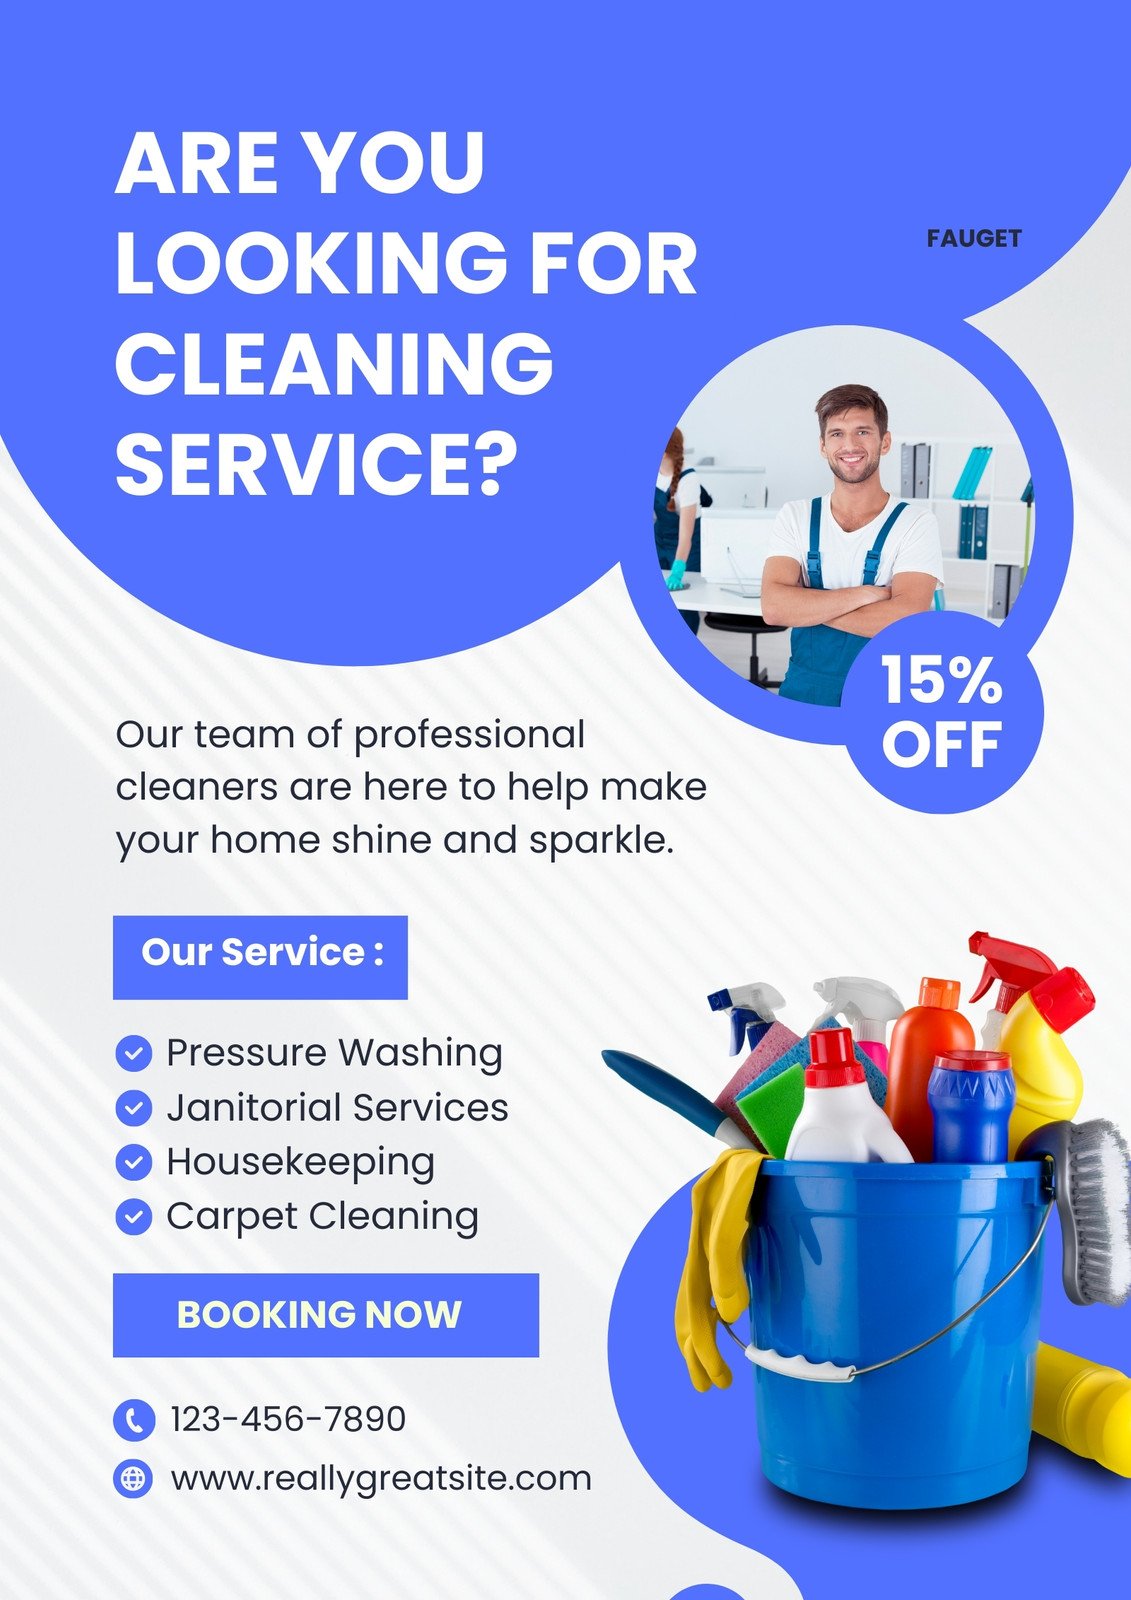 Commercial Cleaning Services Flyers